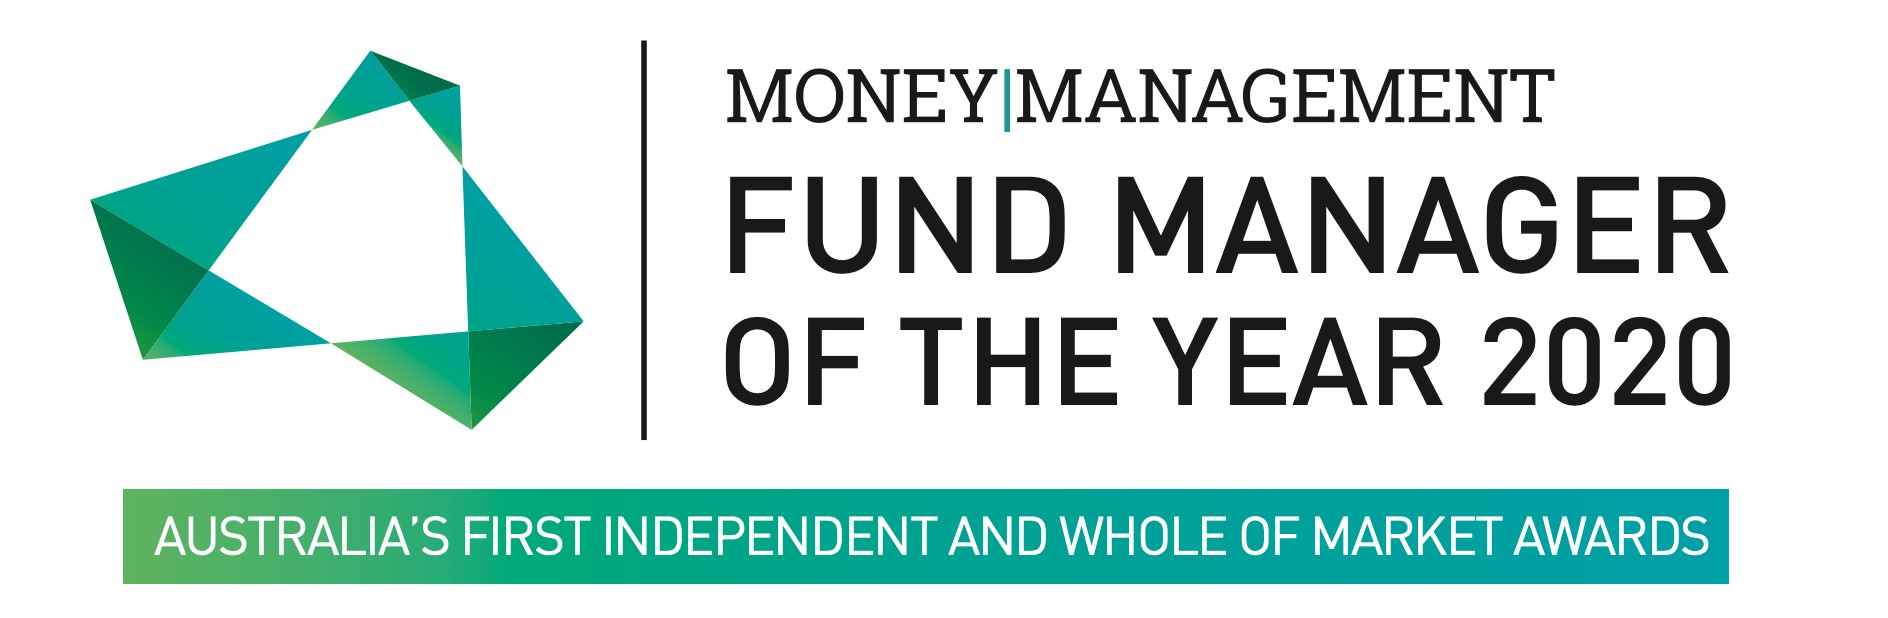 fund-manager-of-the-year-awards-winners-2020